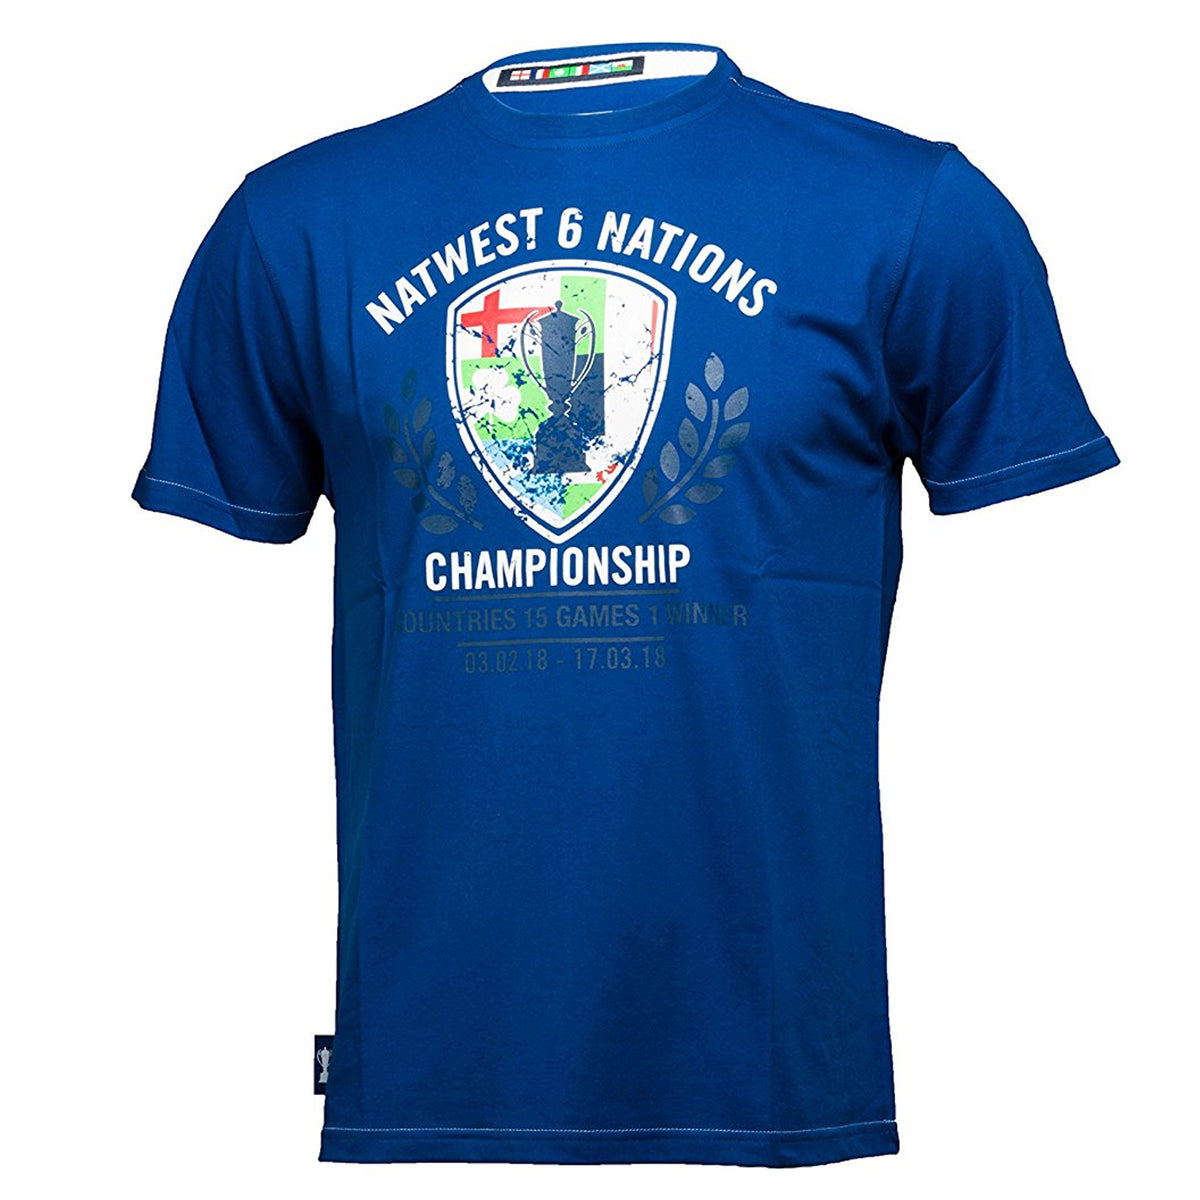 6 Nations Men's Trophy Shield Rugby T-Shirt